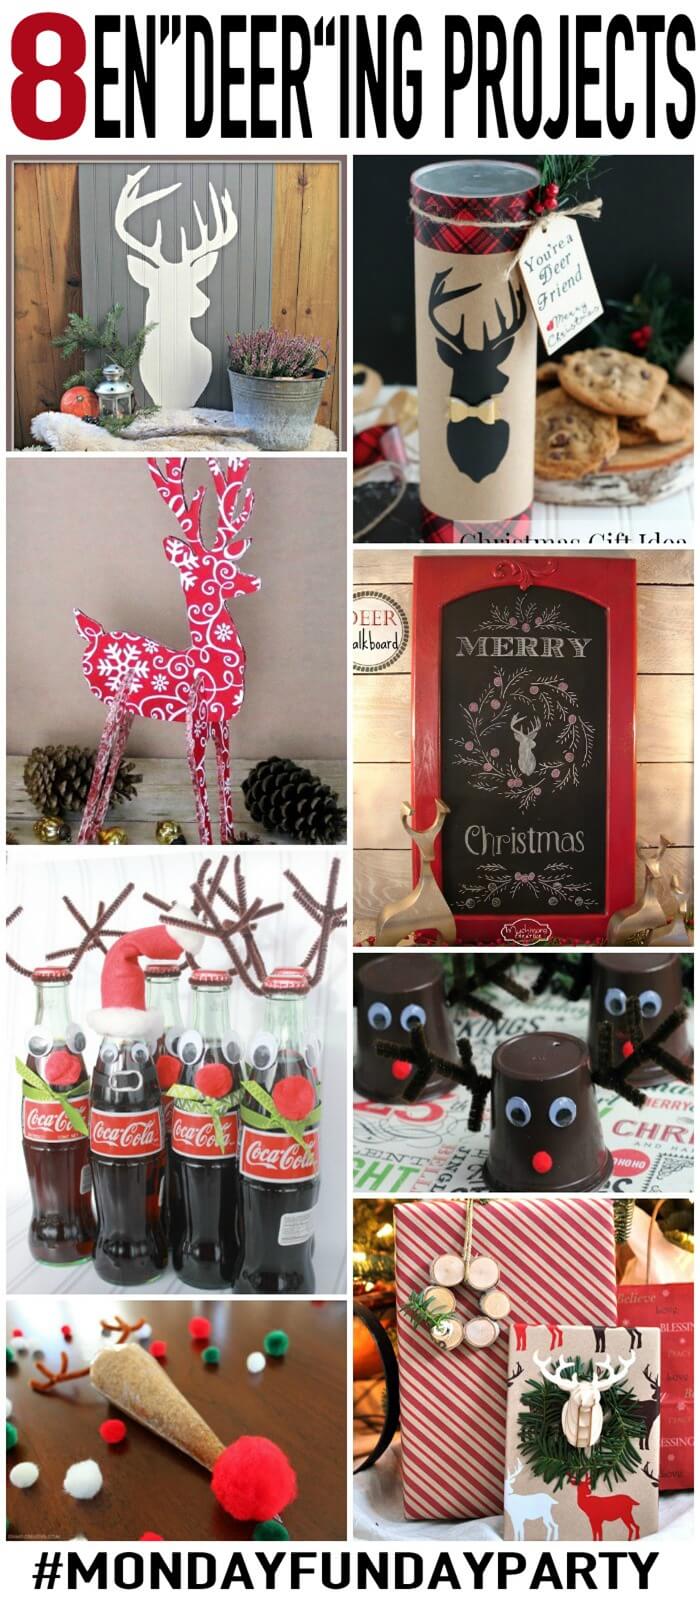 8 Deer Projects at thatswhatchesaid.com